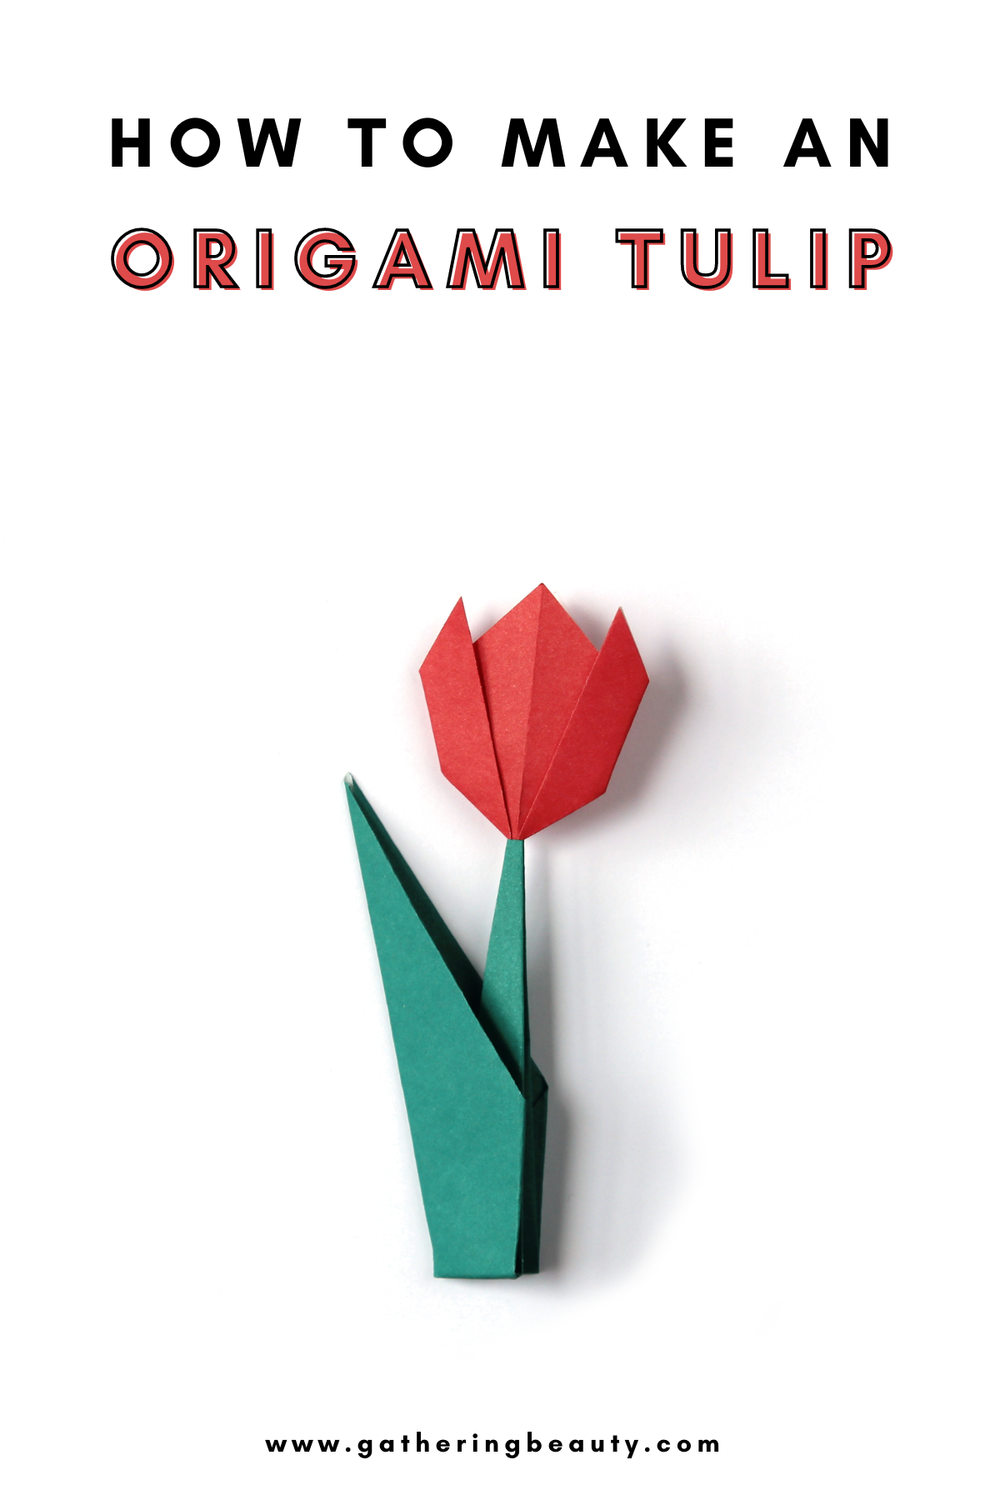 leje Bule Legepladsudstyr How To Make An Origami Tulip. — Gathering Beauty